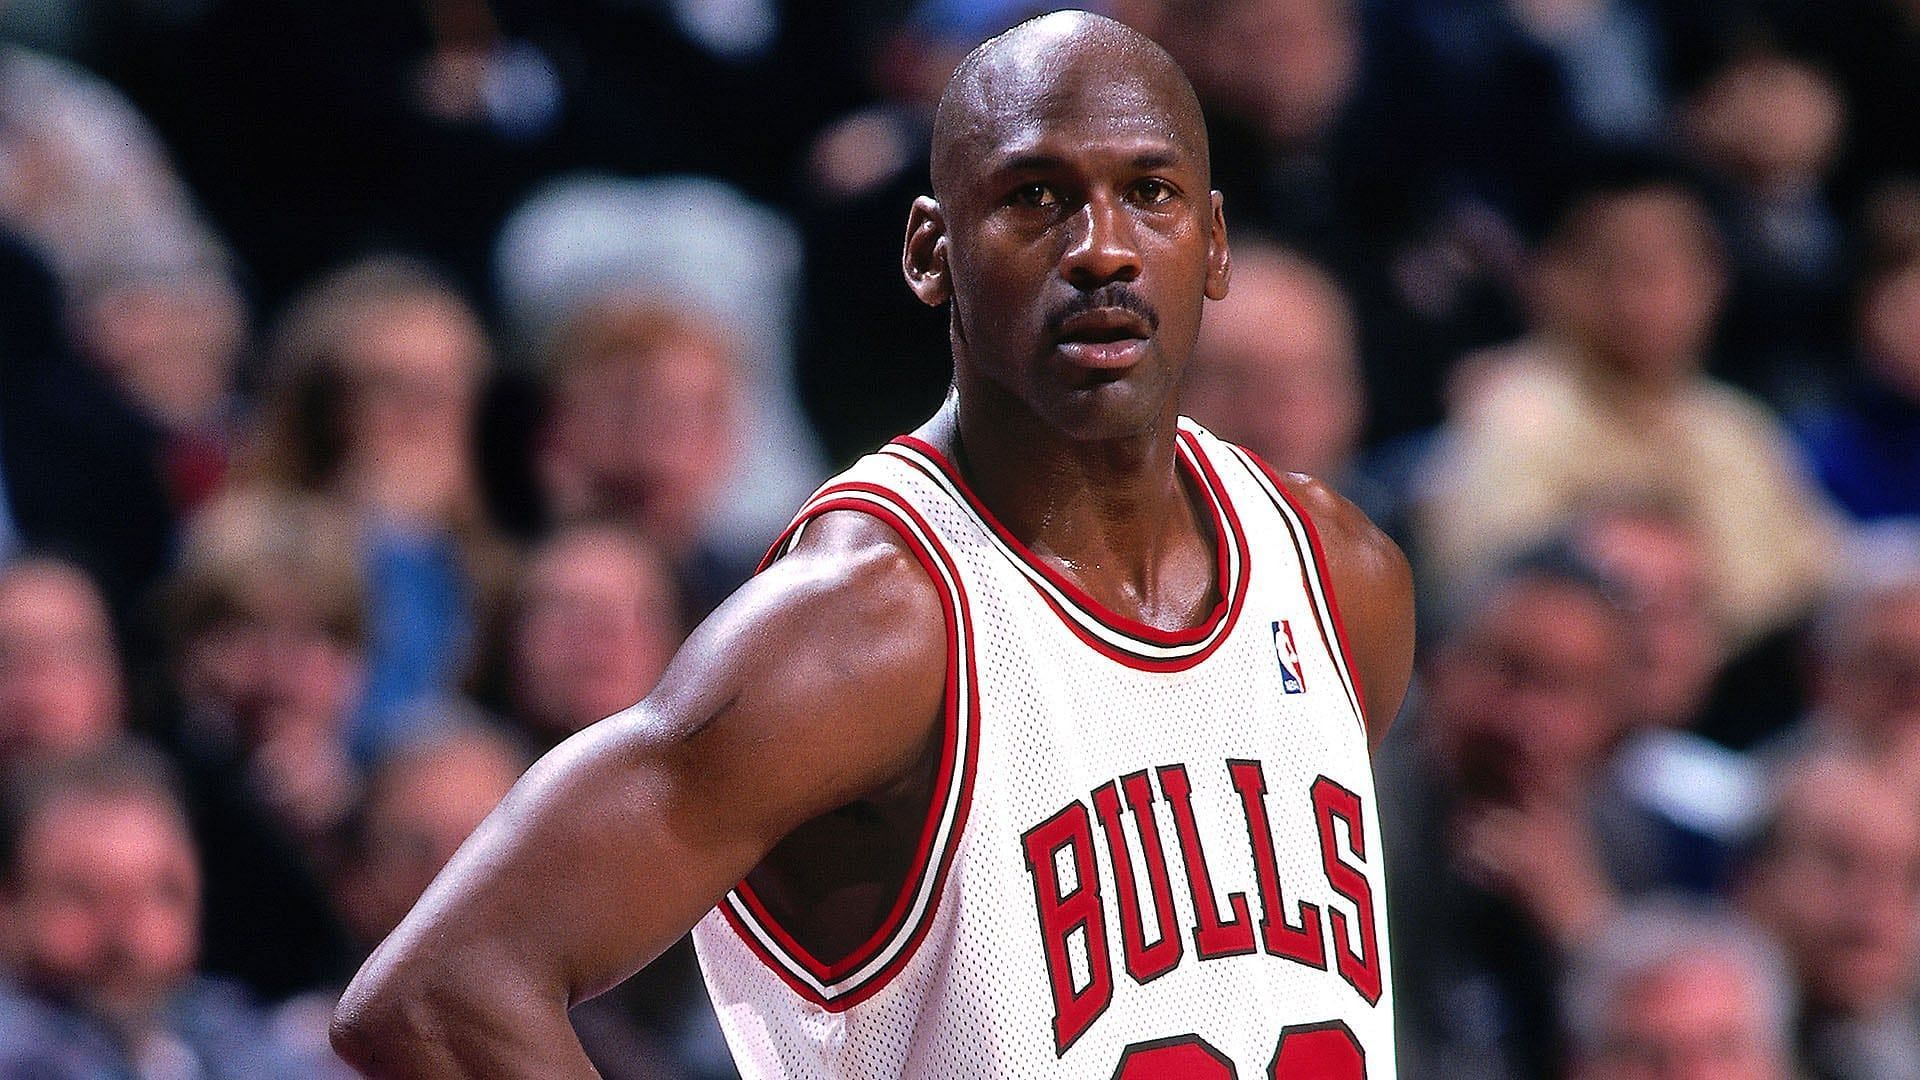 Michael Jordan, while known for his hops and mid-range game, has an underrated burst of speed.